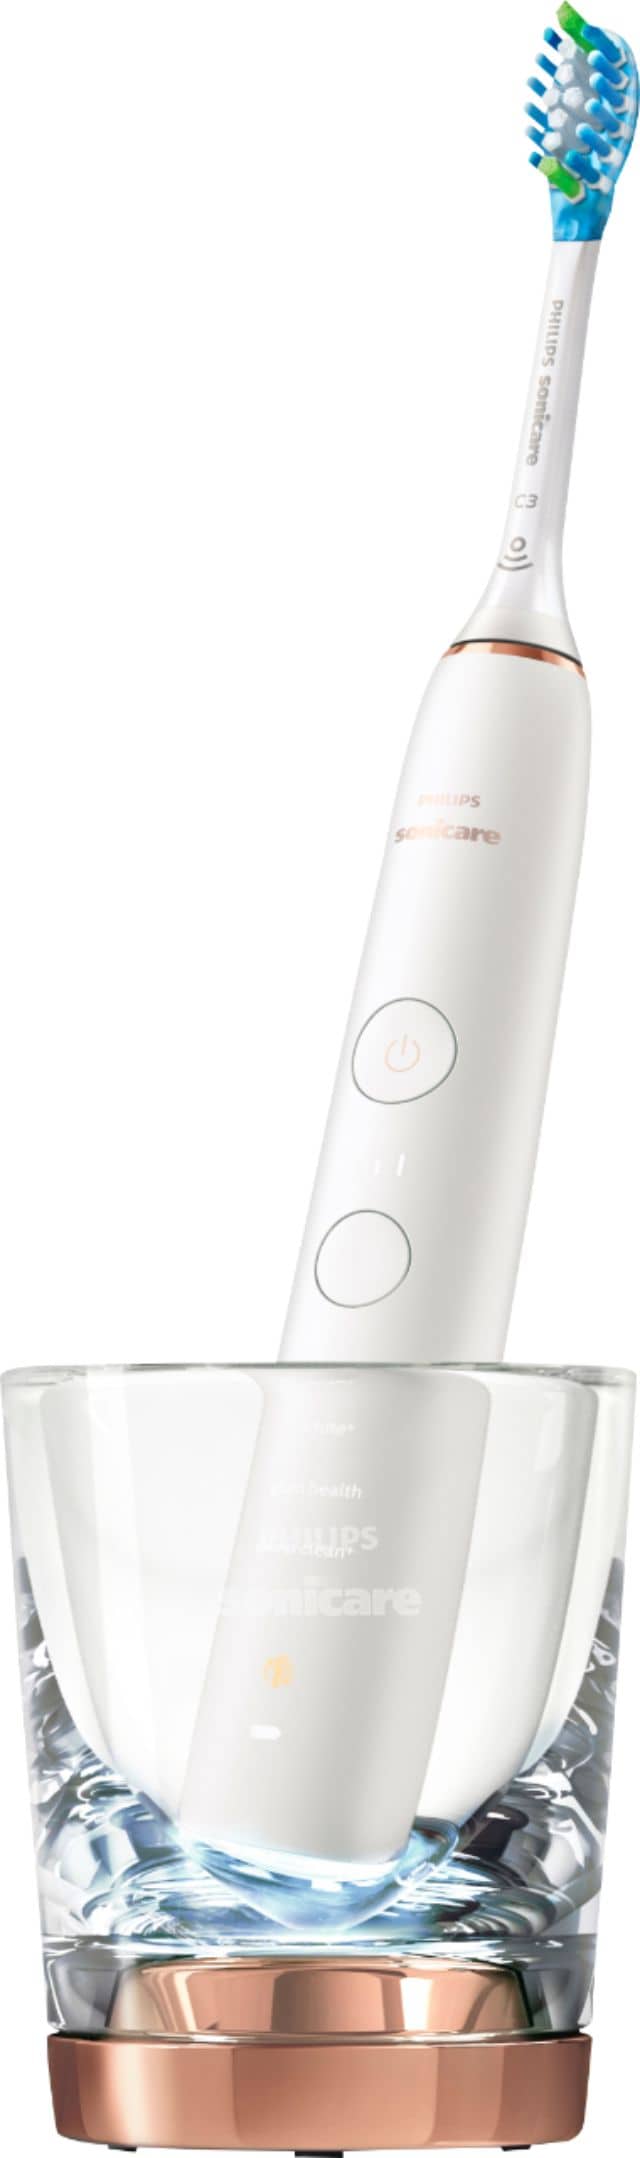 Philips Sonicare - DiamondClean Smart 9300 Rechargeable Toothbrush - Rose Gold_1